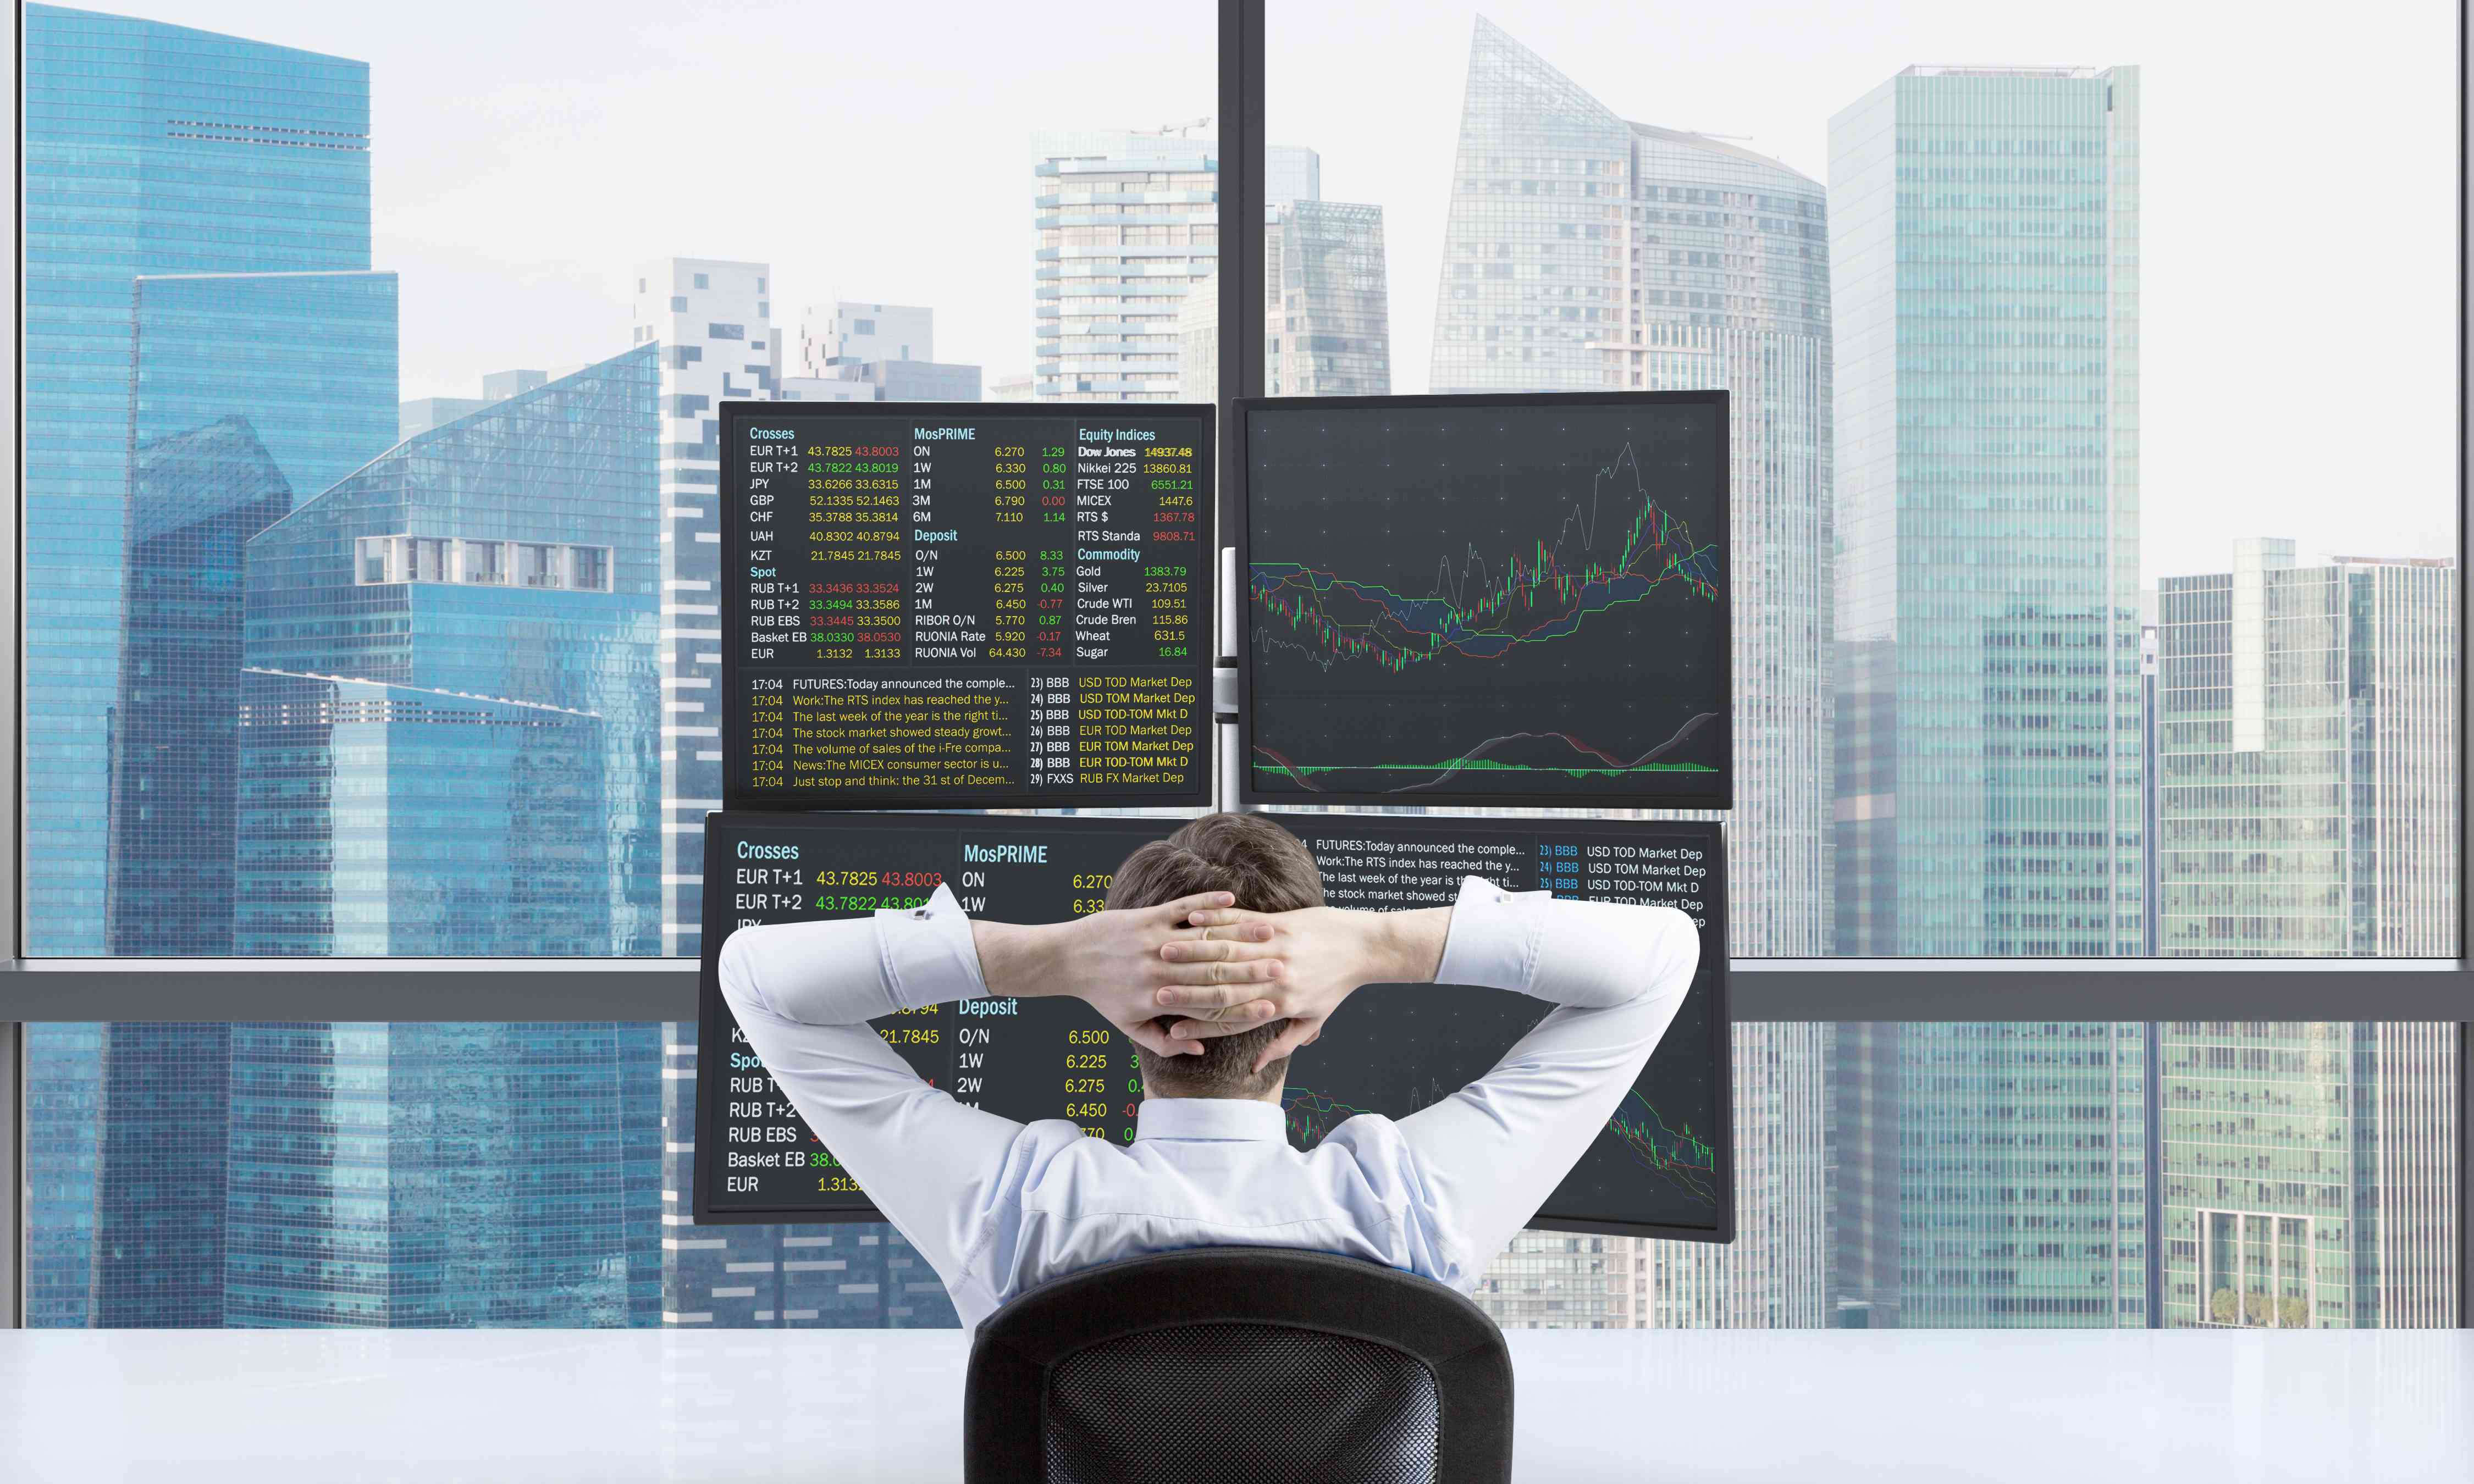 A forex arbitrage trader reclines in an office chair as they watch four monitors showing changes in international interest rates.